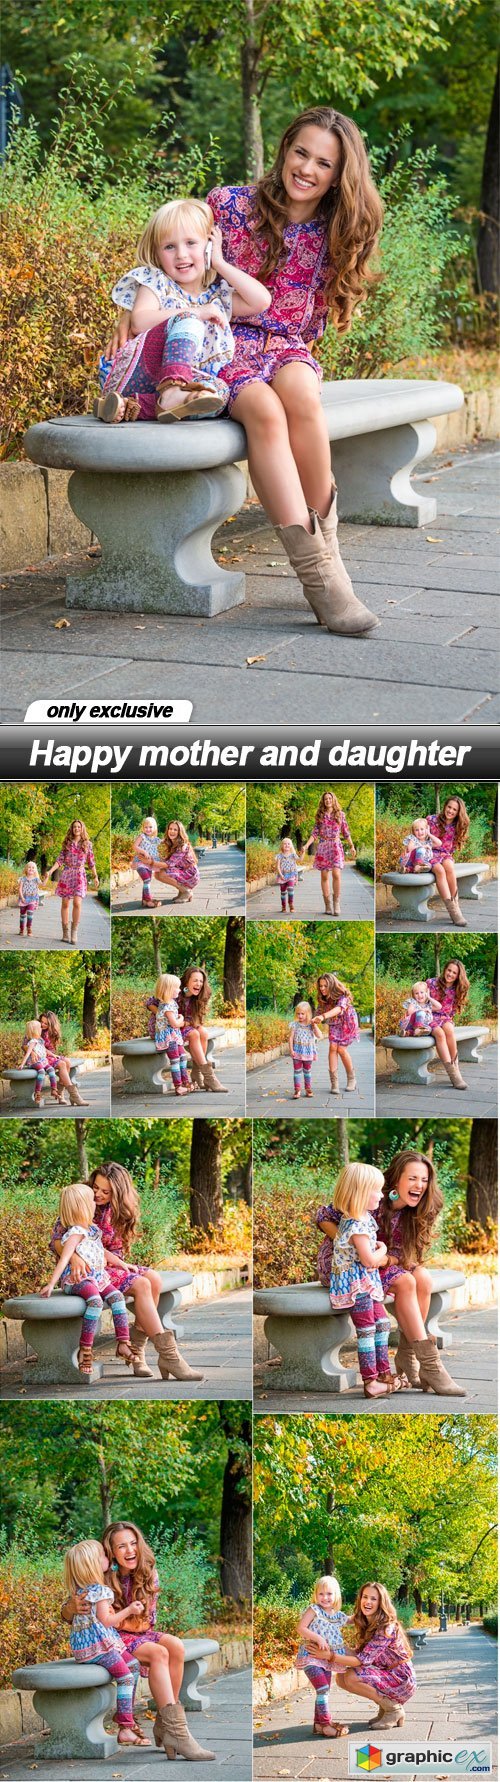 Happy mother and daughter - 12 UHQ JPEG